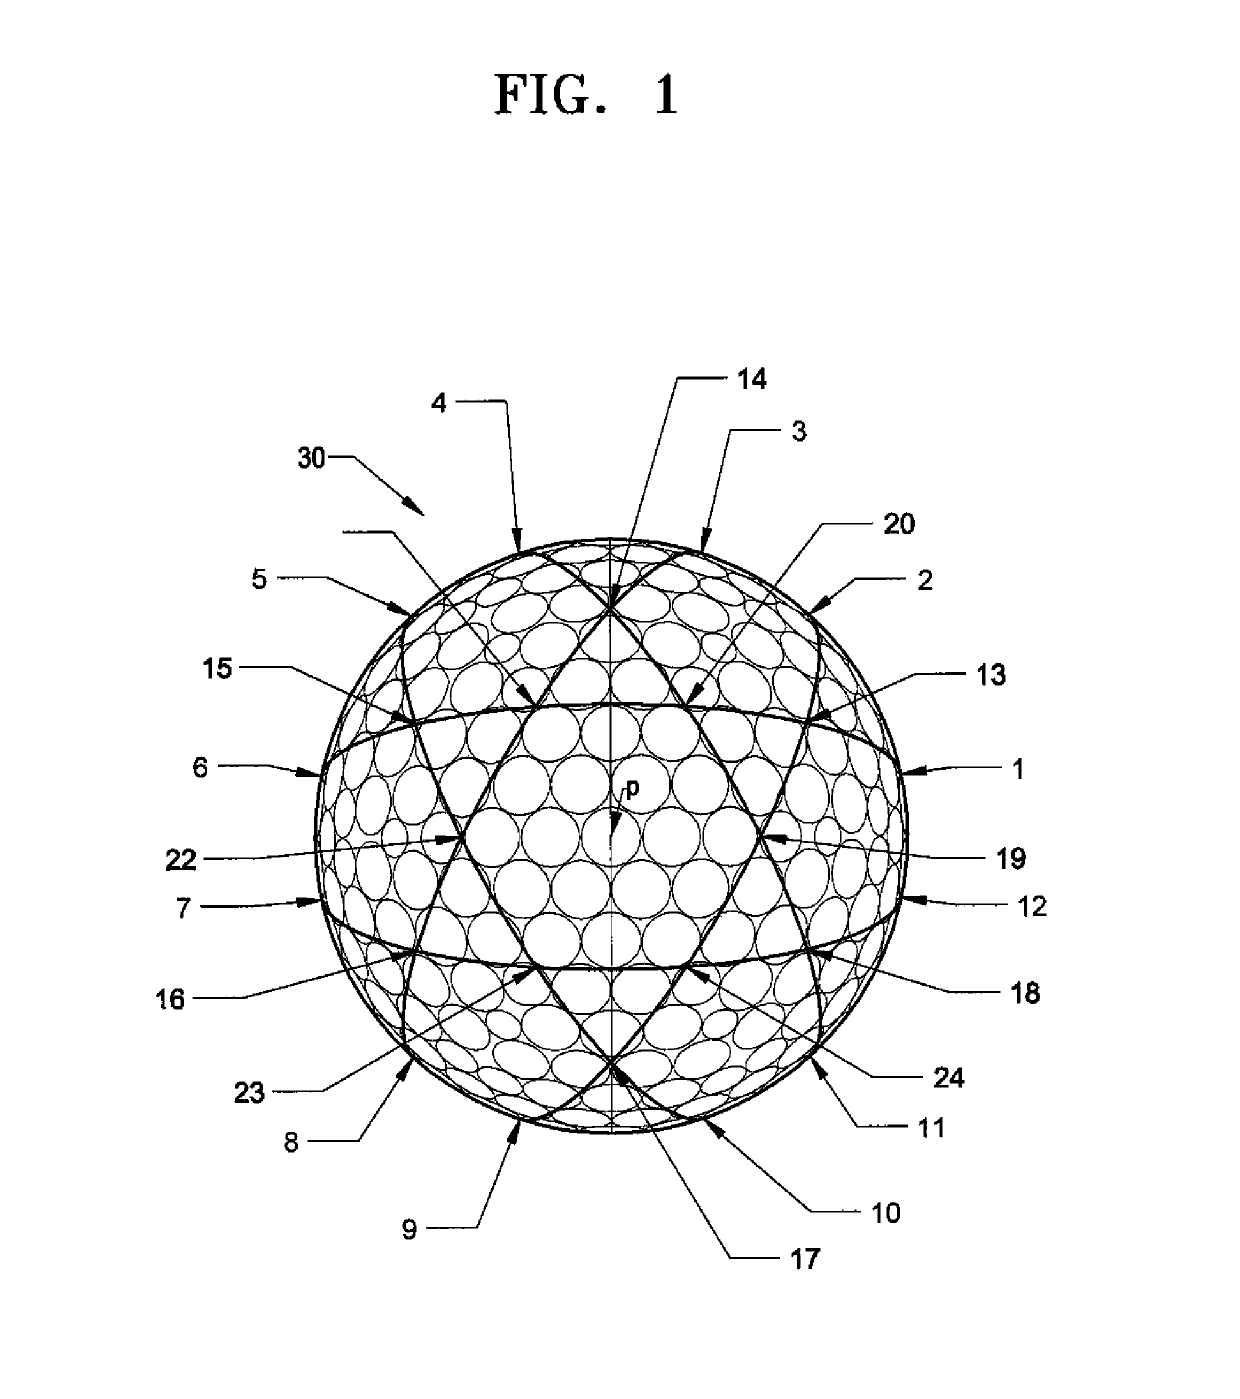 Method of dividing spherical surface of golf ball, and golf ball having surface divided by method